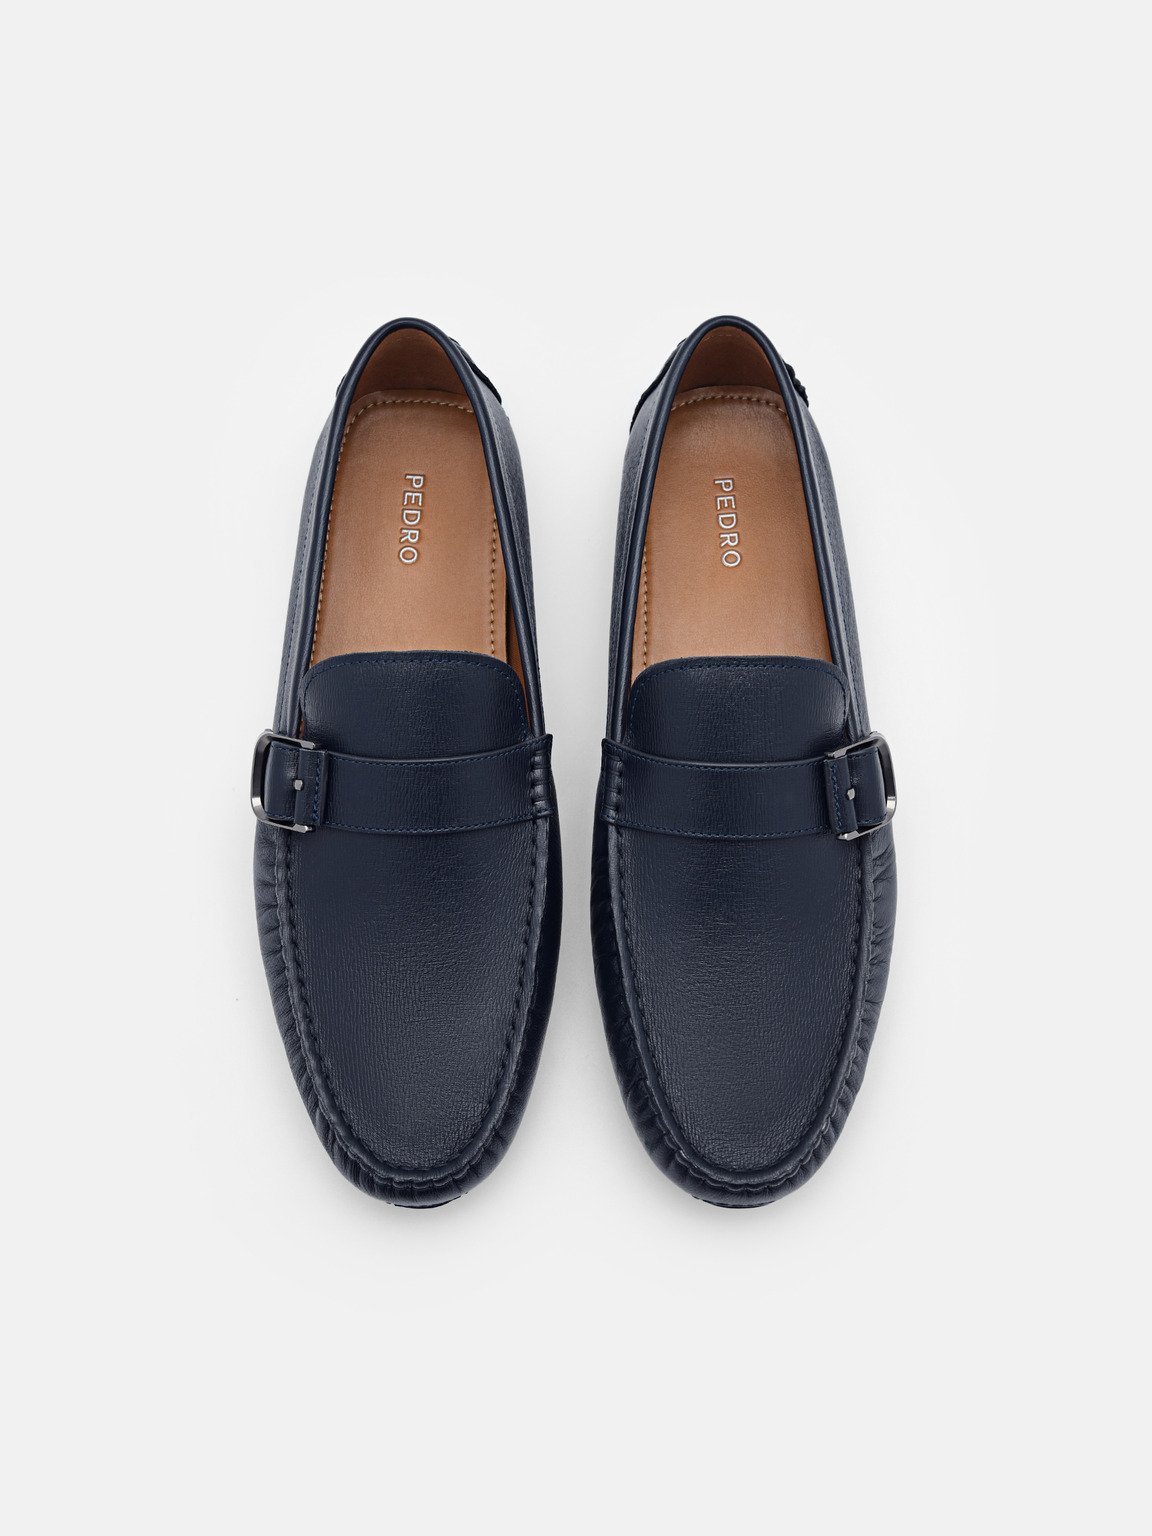 Helix Leather Driving Shoes, Navy